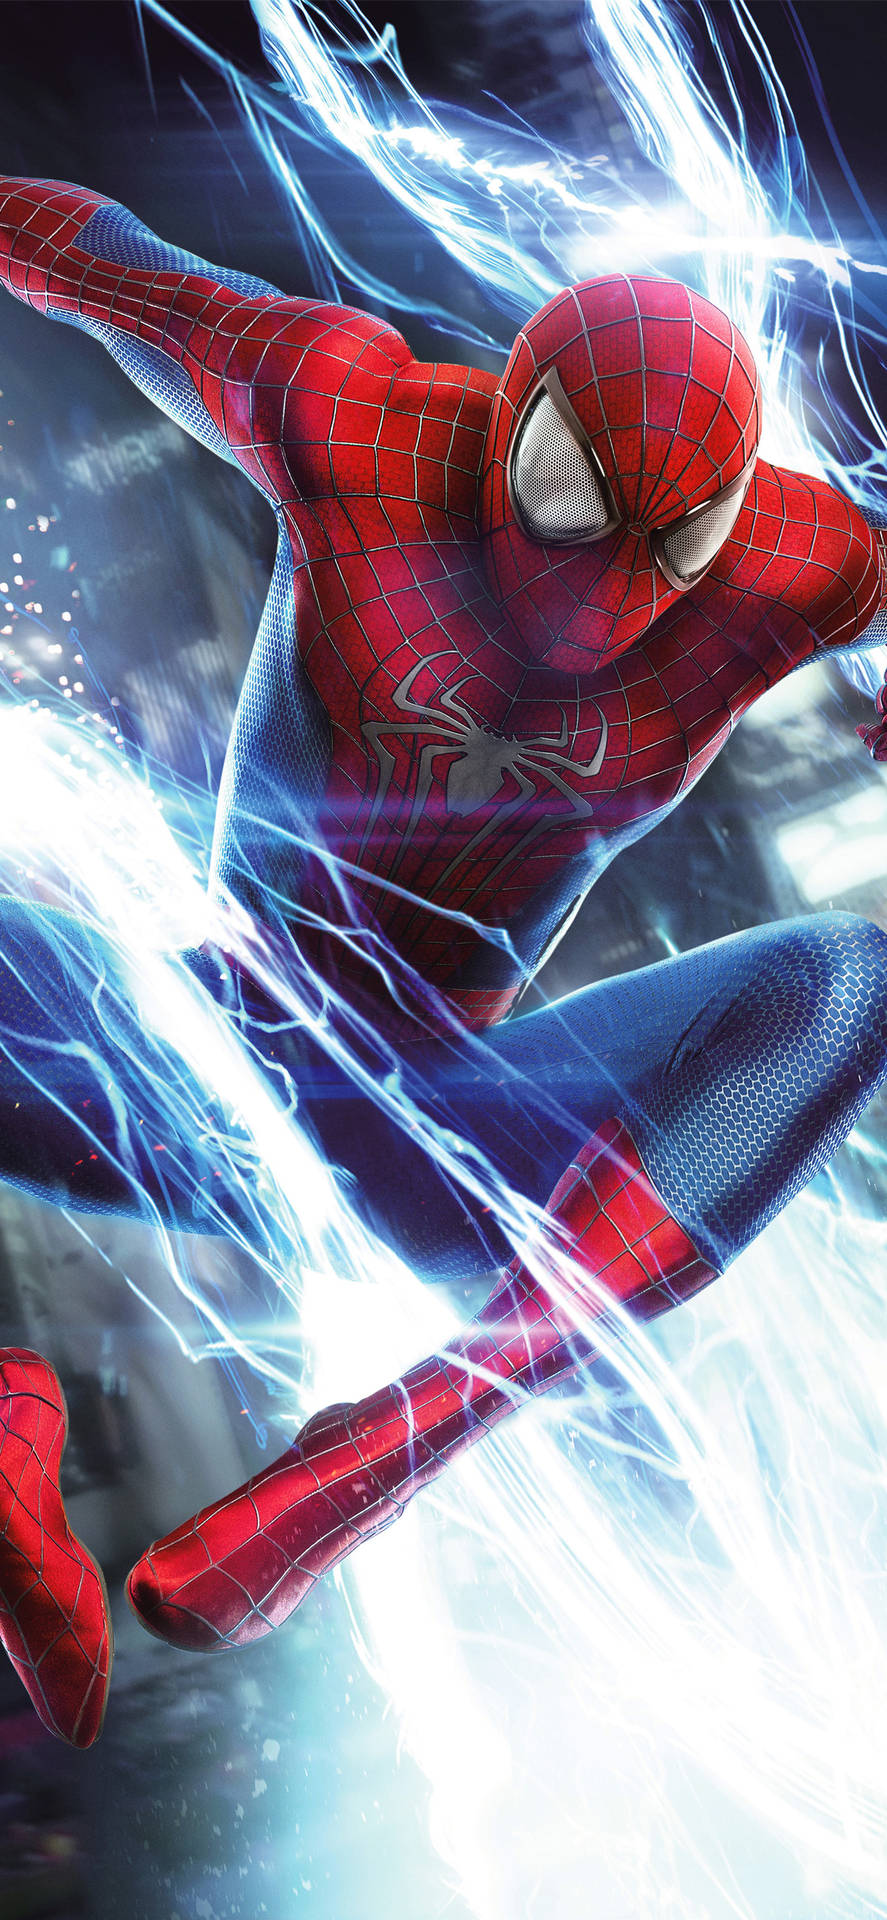 It's the Amazing Spider Man! Wallpaper